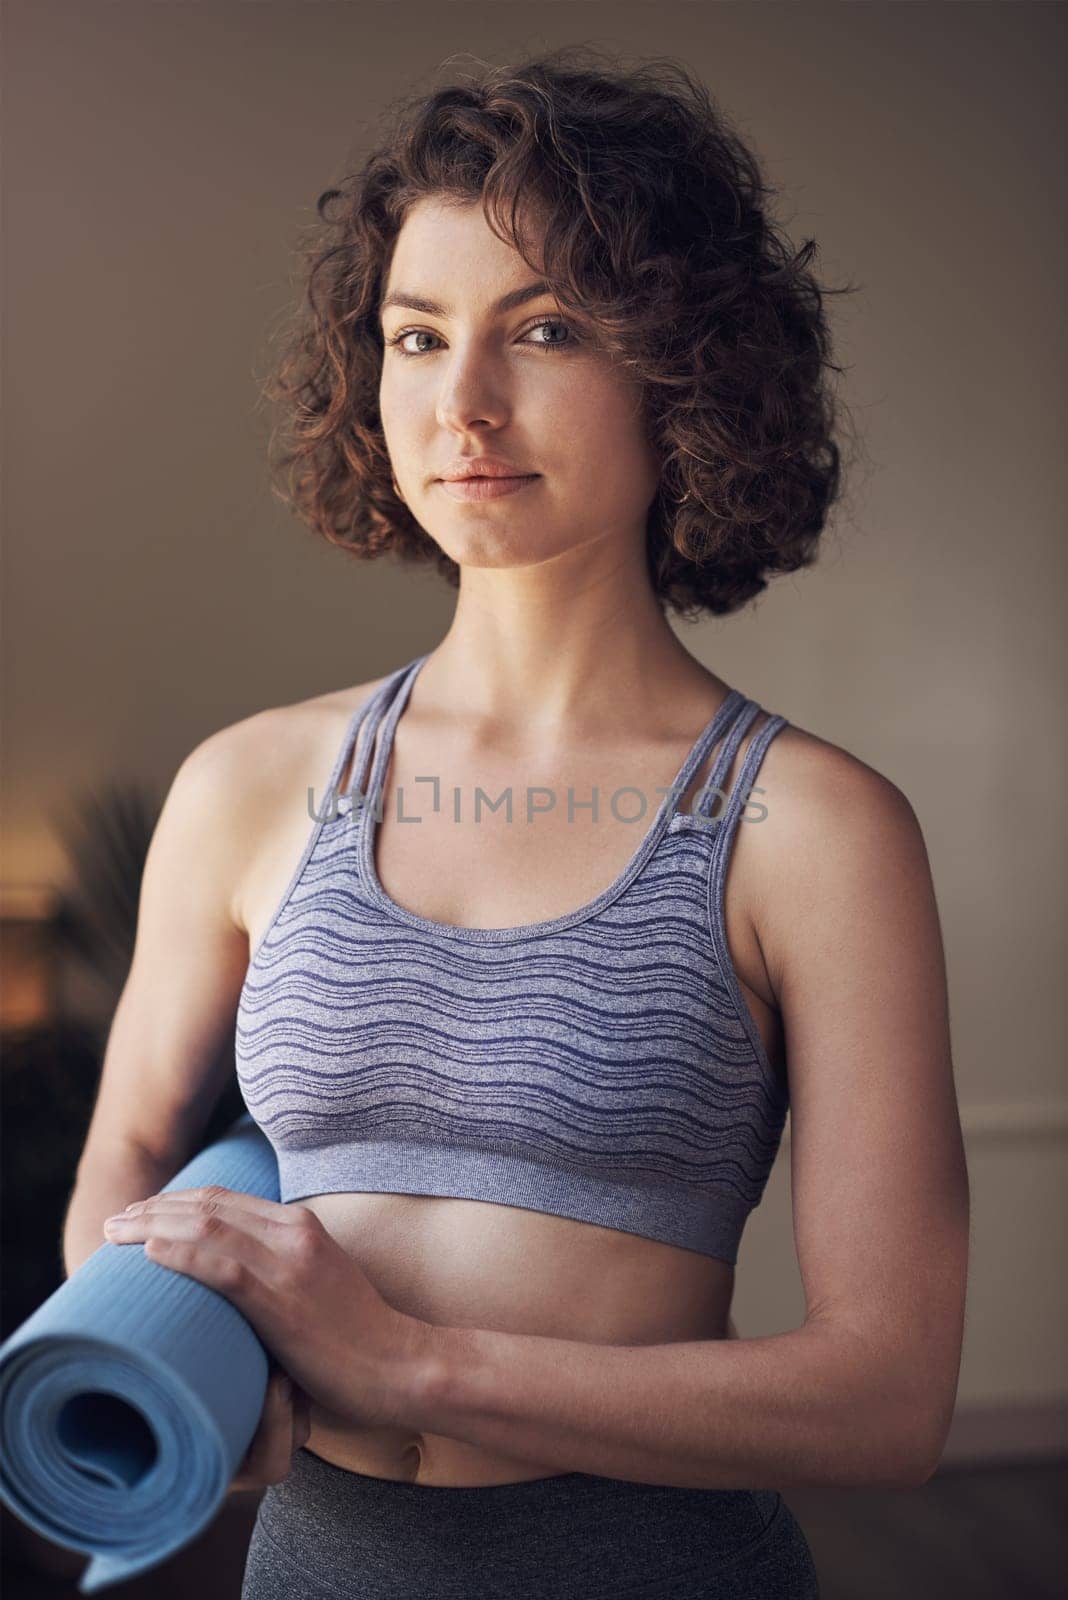 A day without yoga is a day wasted. Cropped portrait of an attractive young woman standing alone and holding her yoga mat before an indoor yoga session. by YuriArcurs